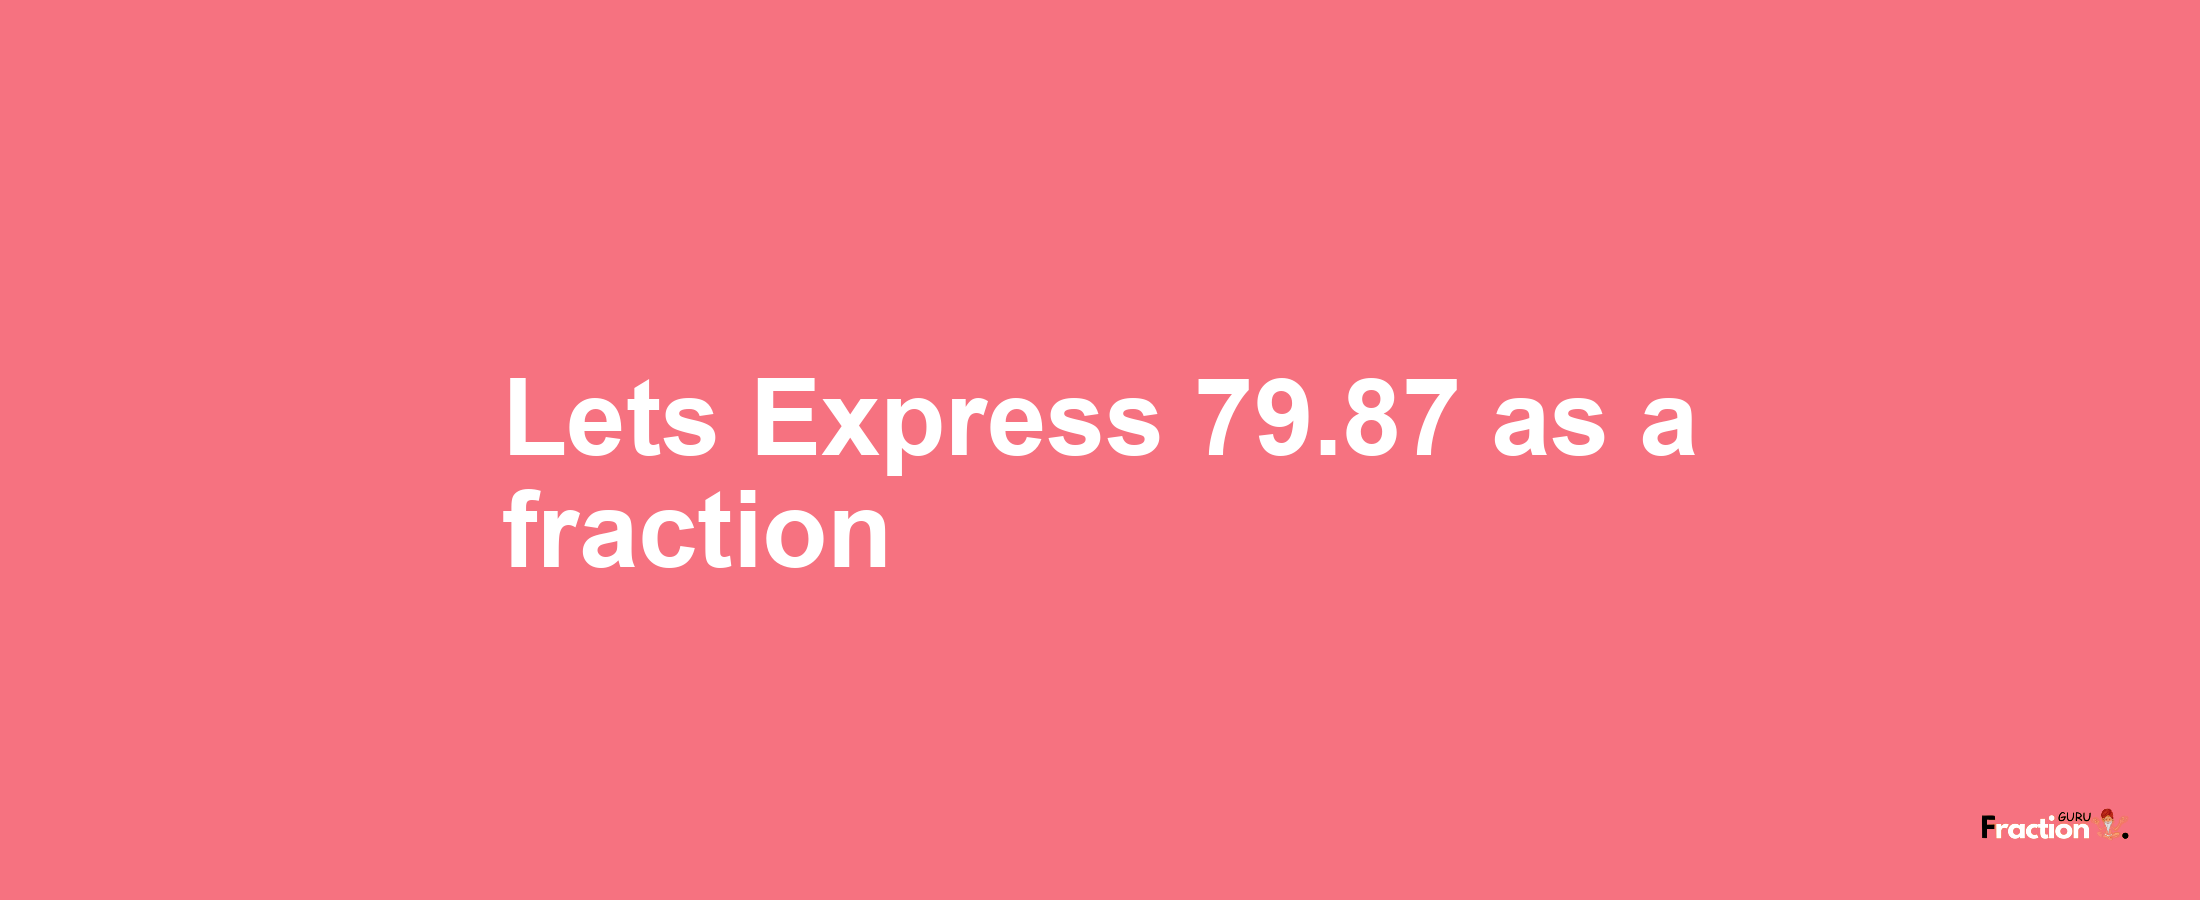 Lets Express 79.87 as afraction